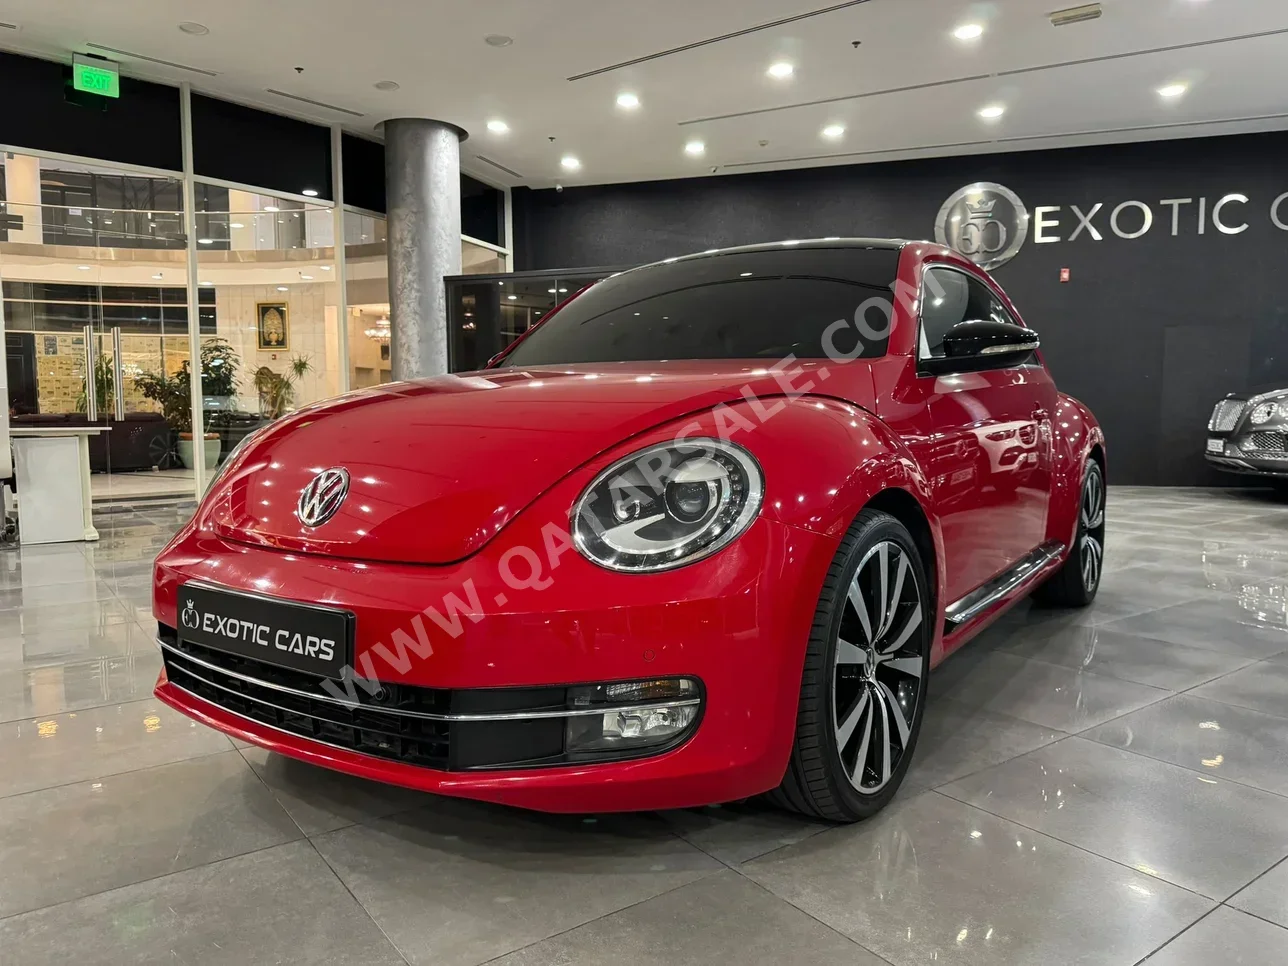 Volkswagen  Beetle  Turbo  2016  Automatic  56,000 Km  4 Cylinder  Rear Wheel Drive (RWD)  Hatchback  Red